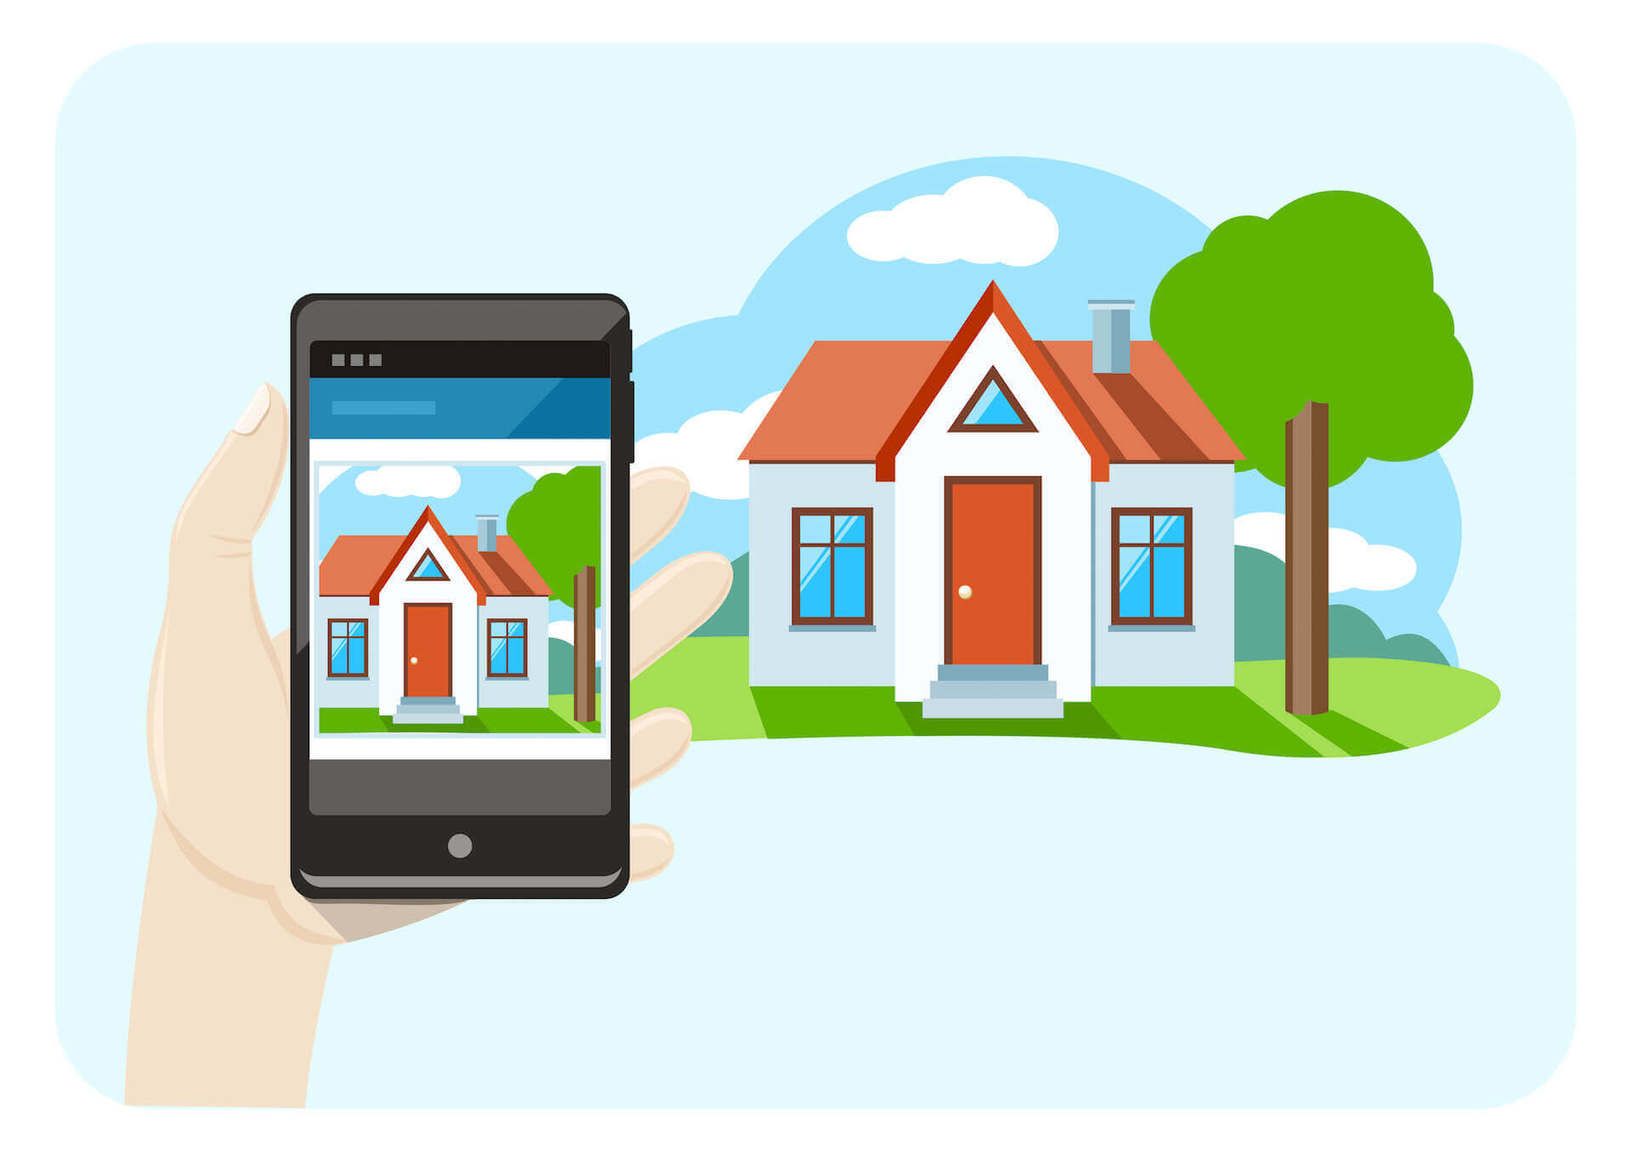 How Technology is Helping People Buy and Sell Real Estate Today - April 28, 2020